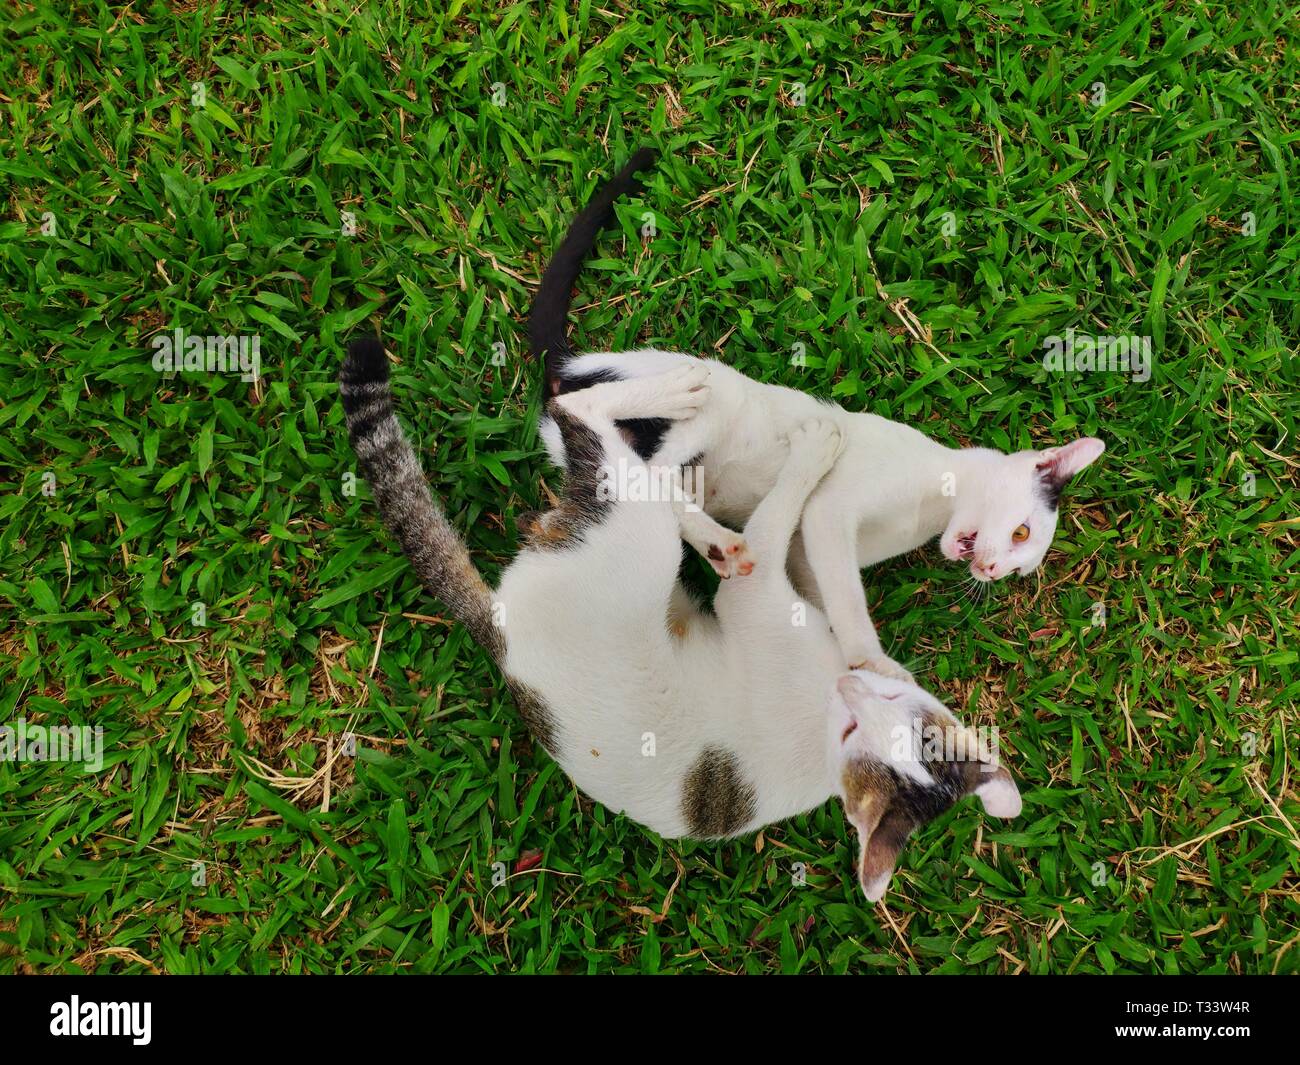 Funny And Cute Twin Cats Playing Each Other On Green Grass At Garden